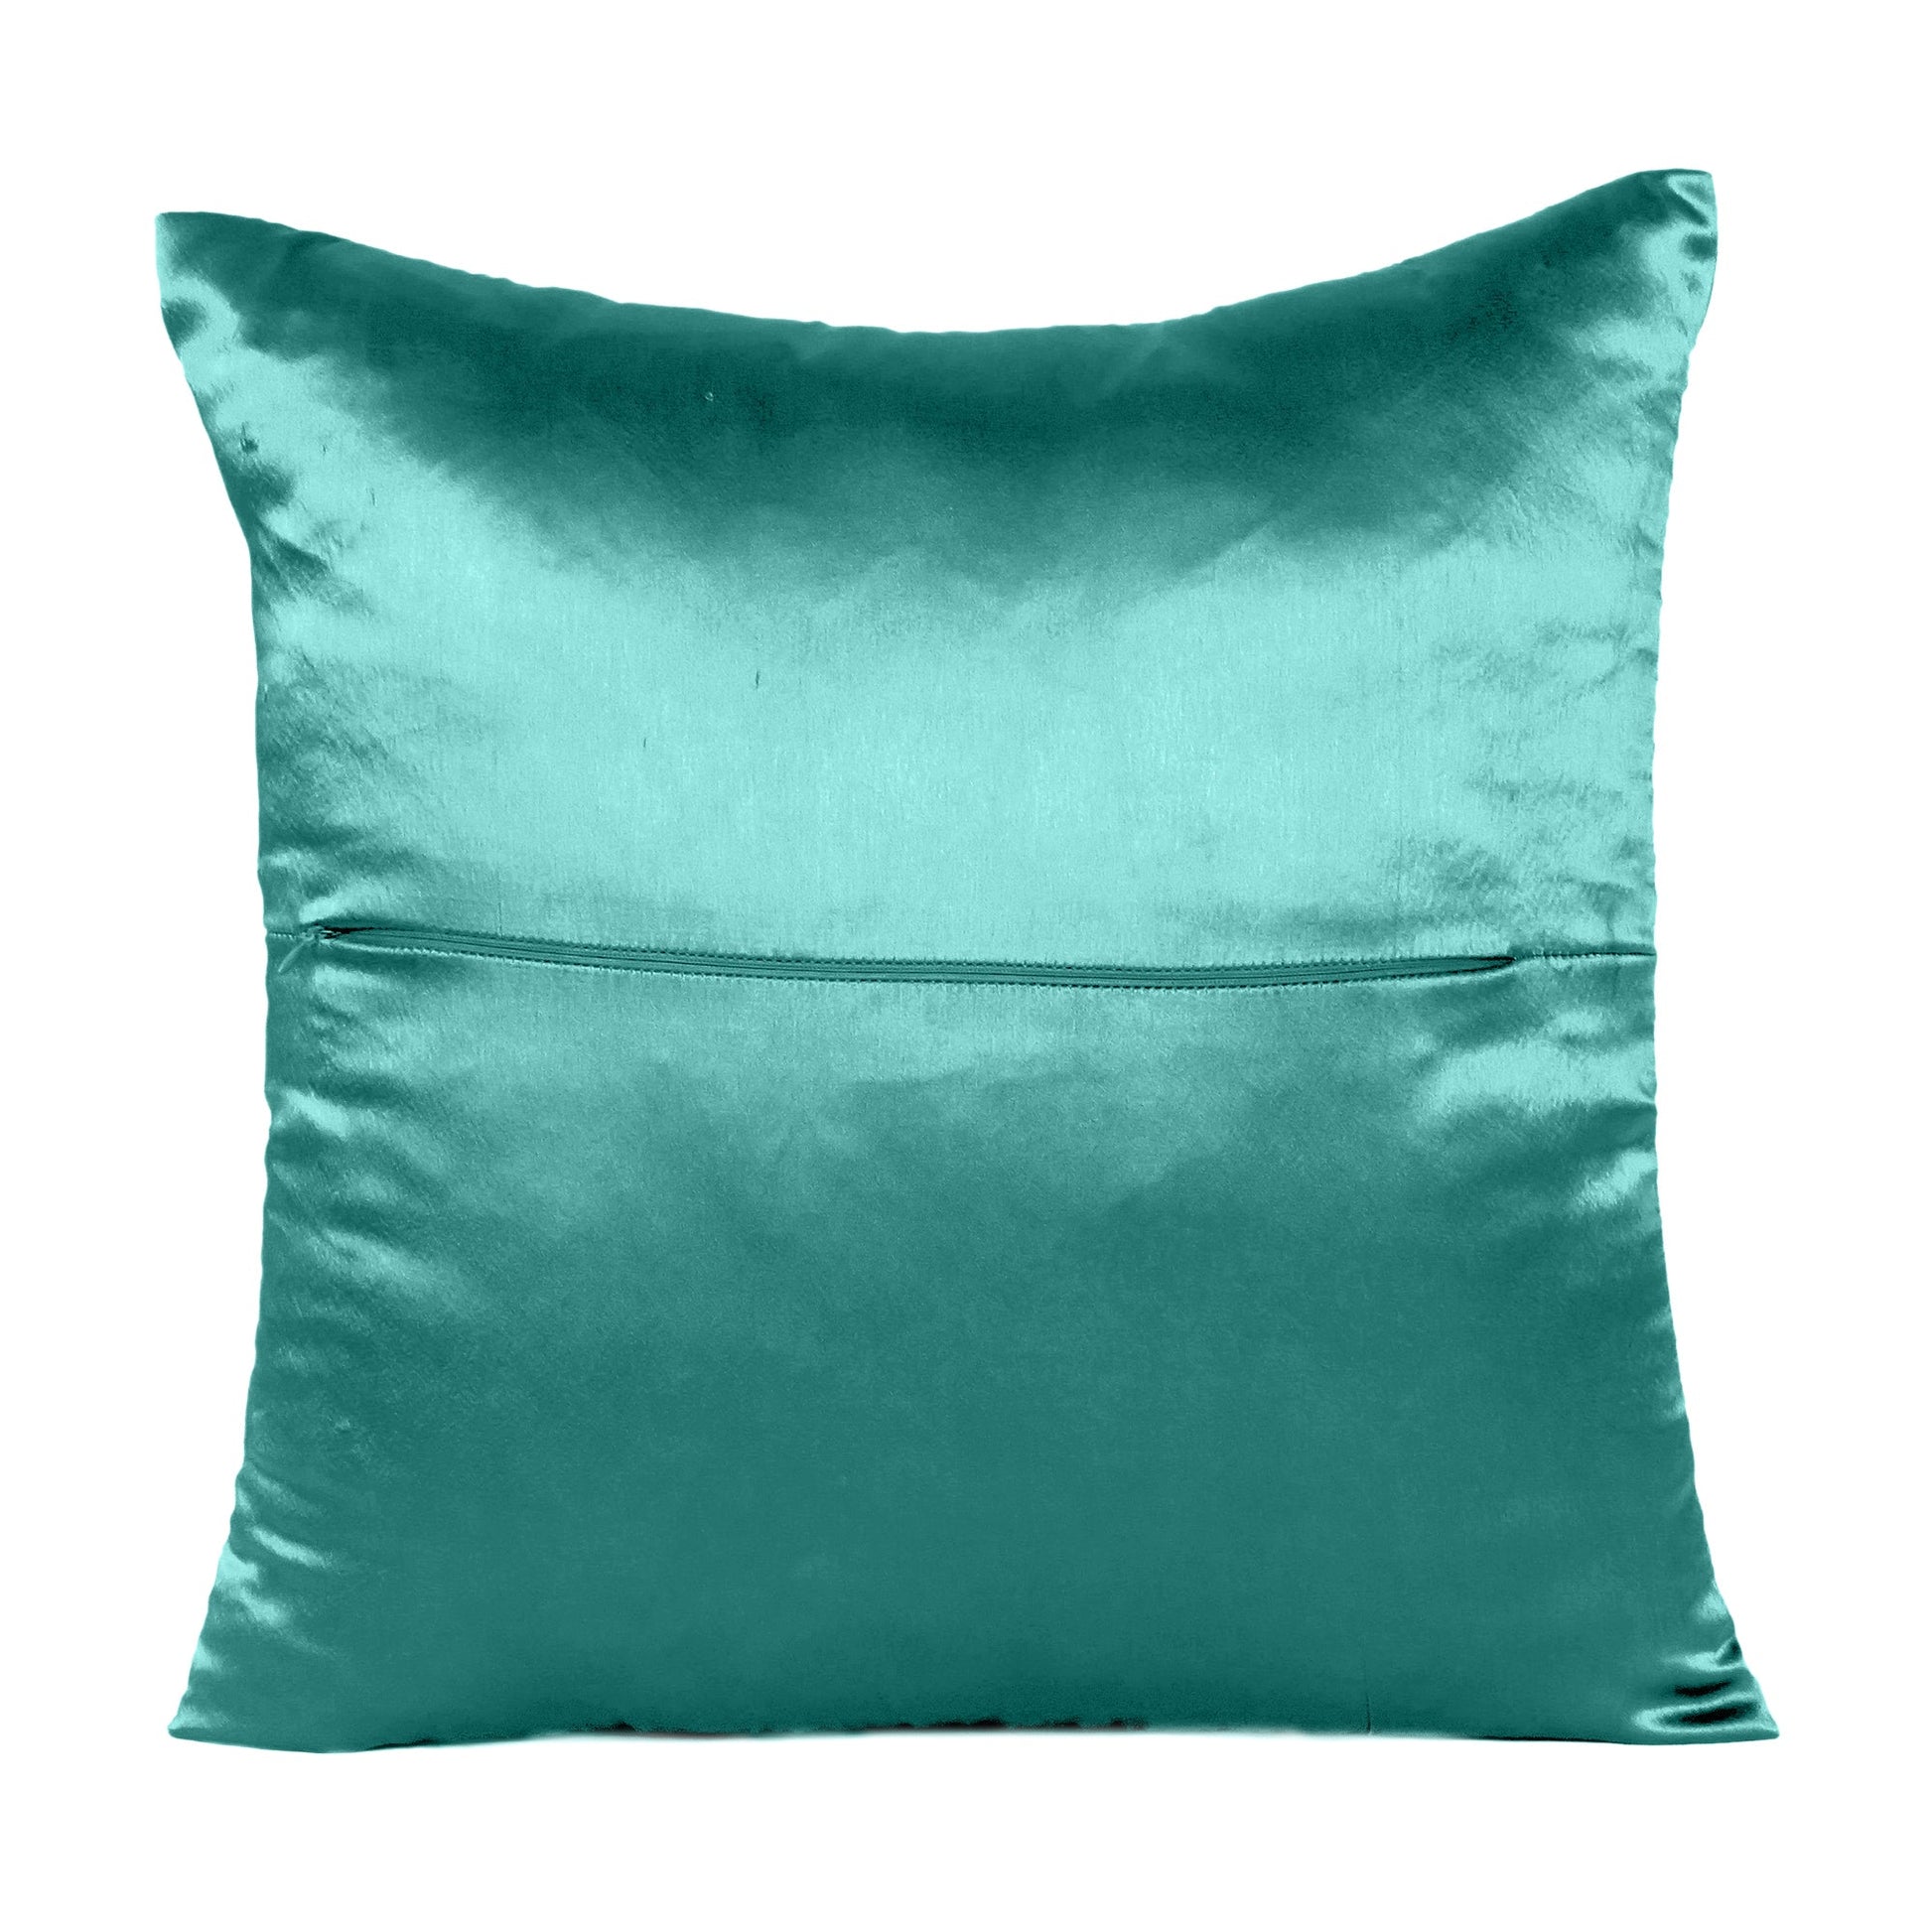 Luxury Soft Plain Satin Silk Cushion Cover in Set of 2 - Teal